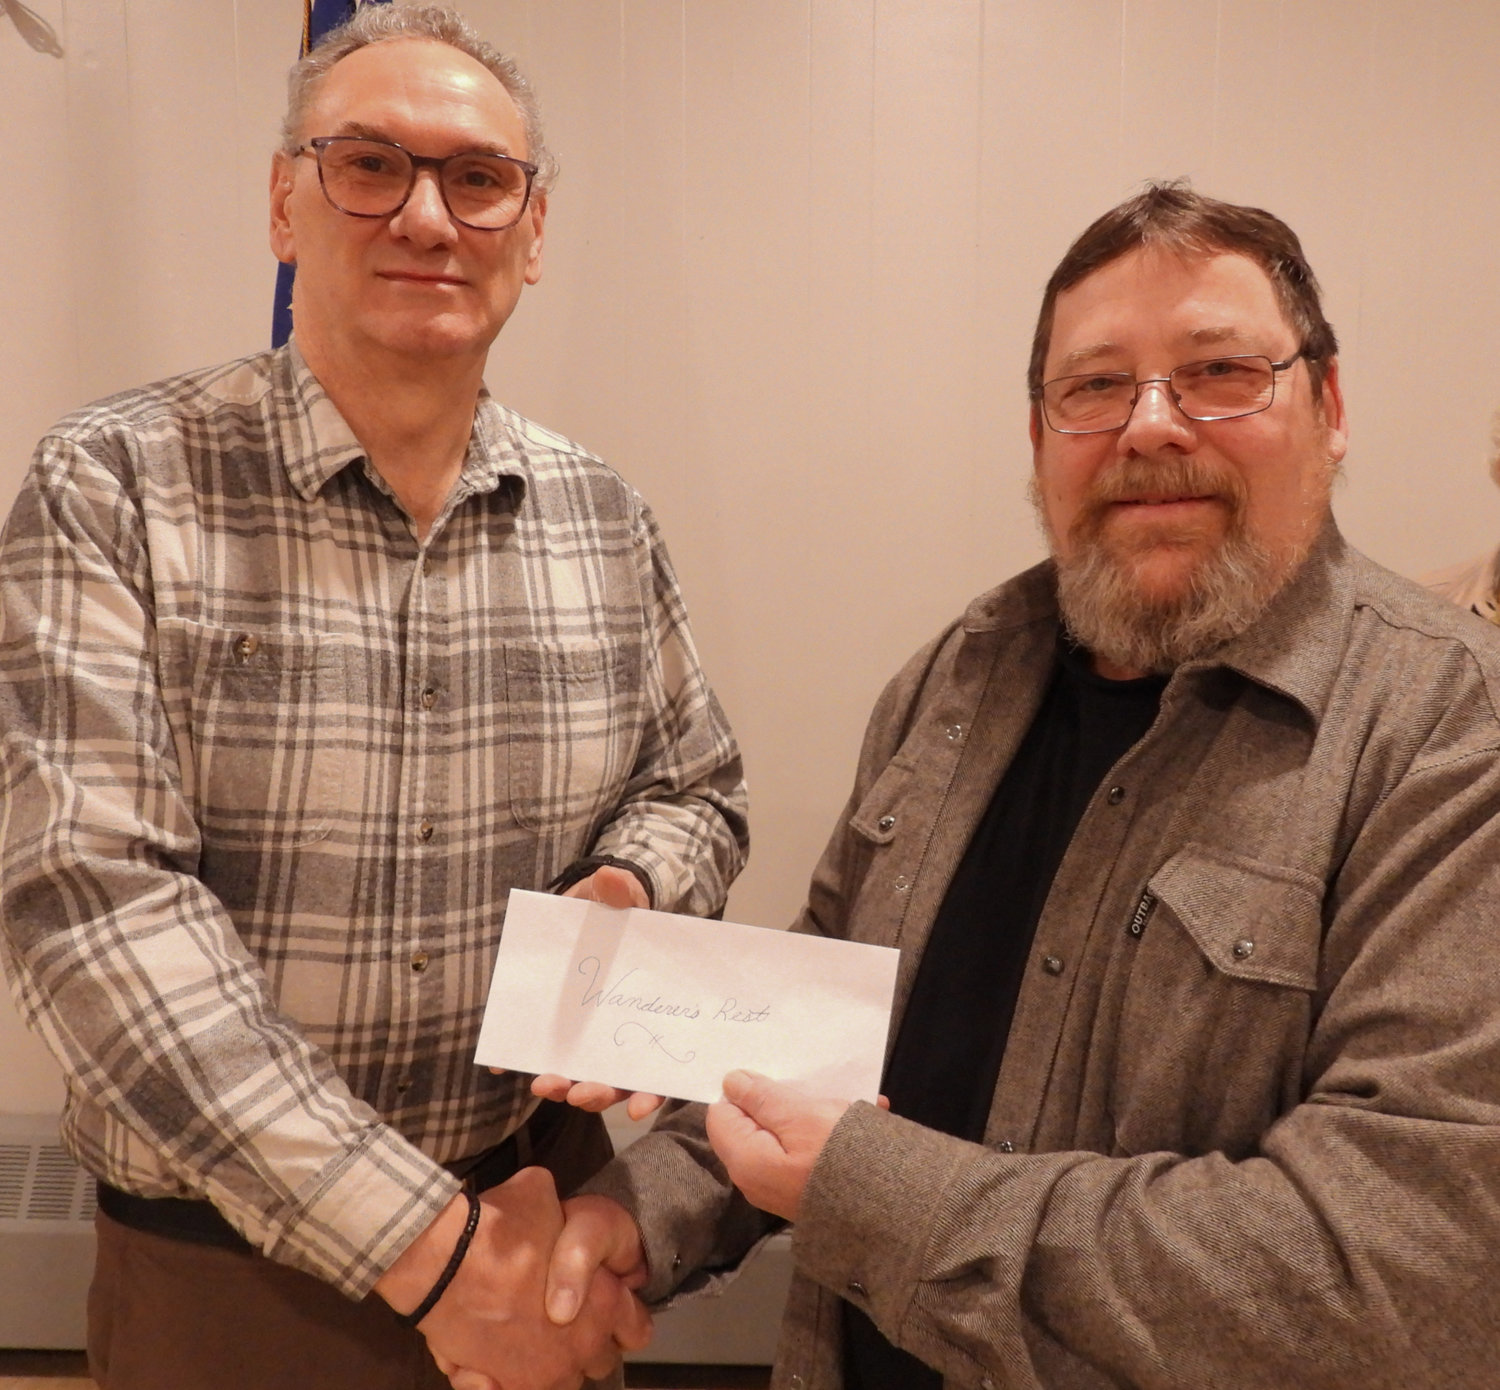 Wanderers' Rest Board President Lewis Carinci, left, shakes hands and receives a check for $2,000 from Owlâs Nest President John Smoyer on Monday, Fe